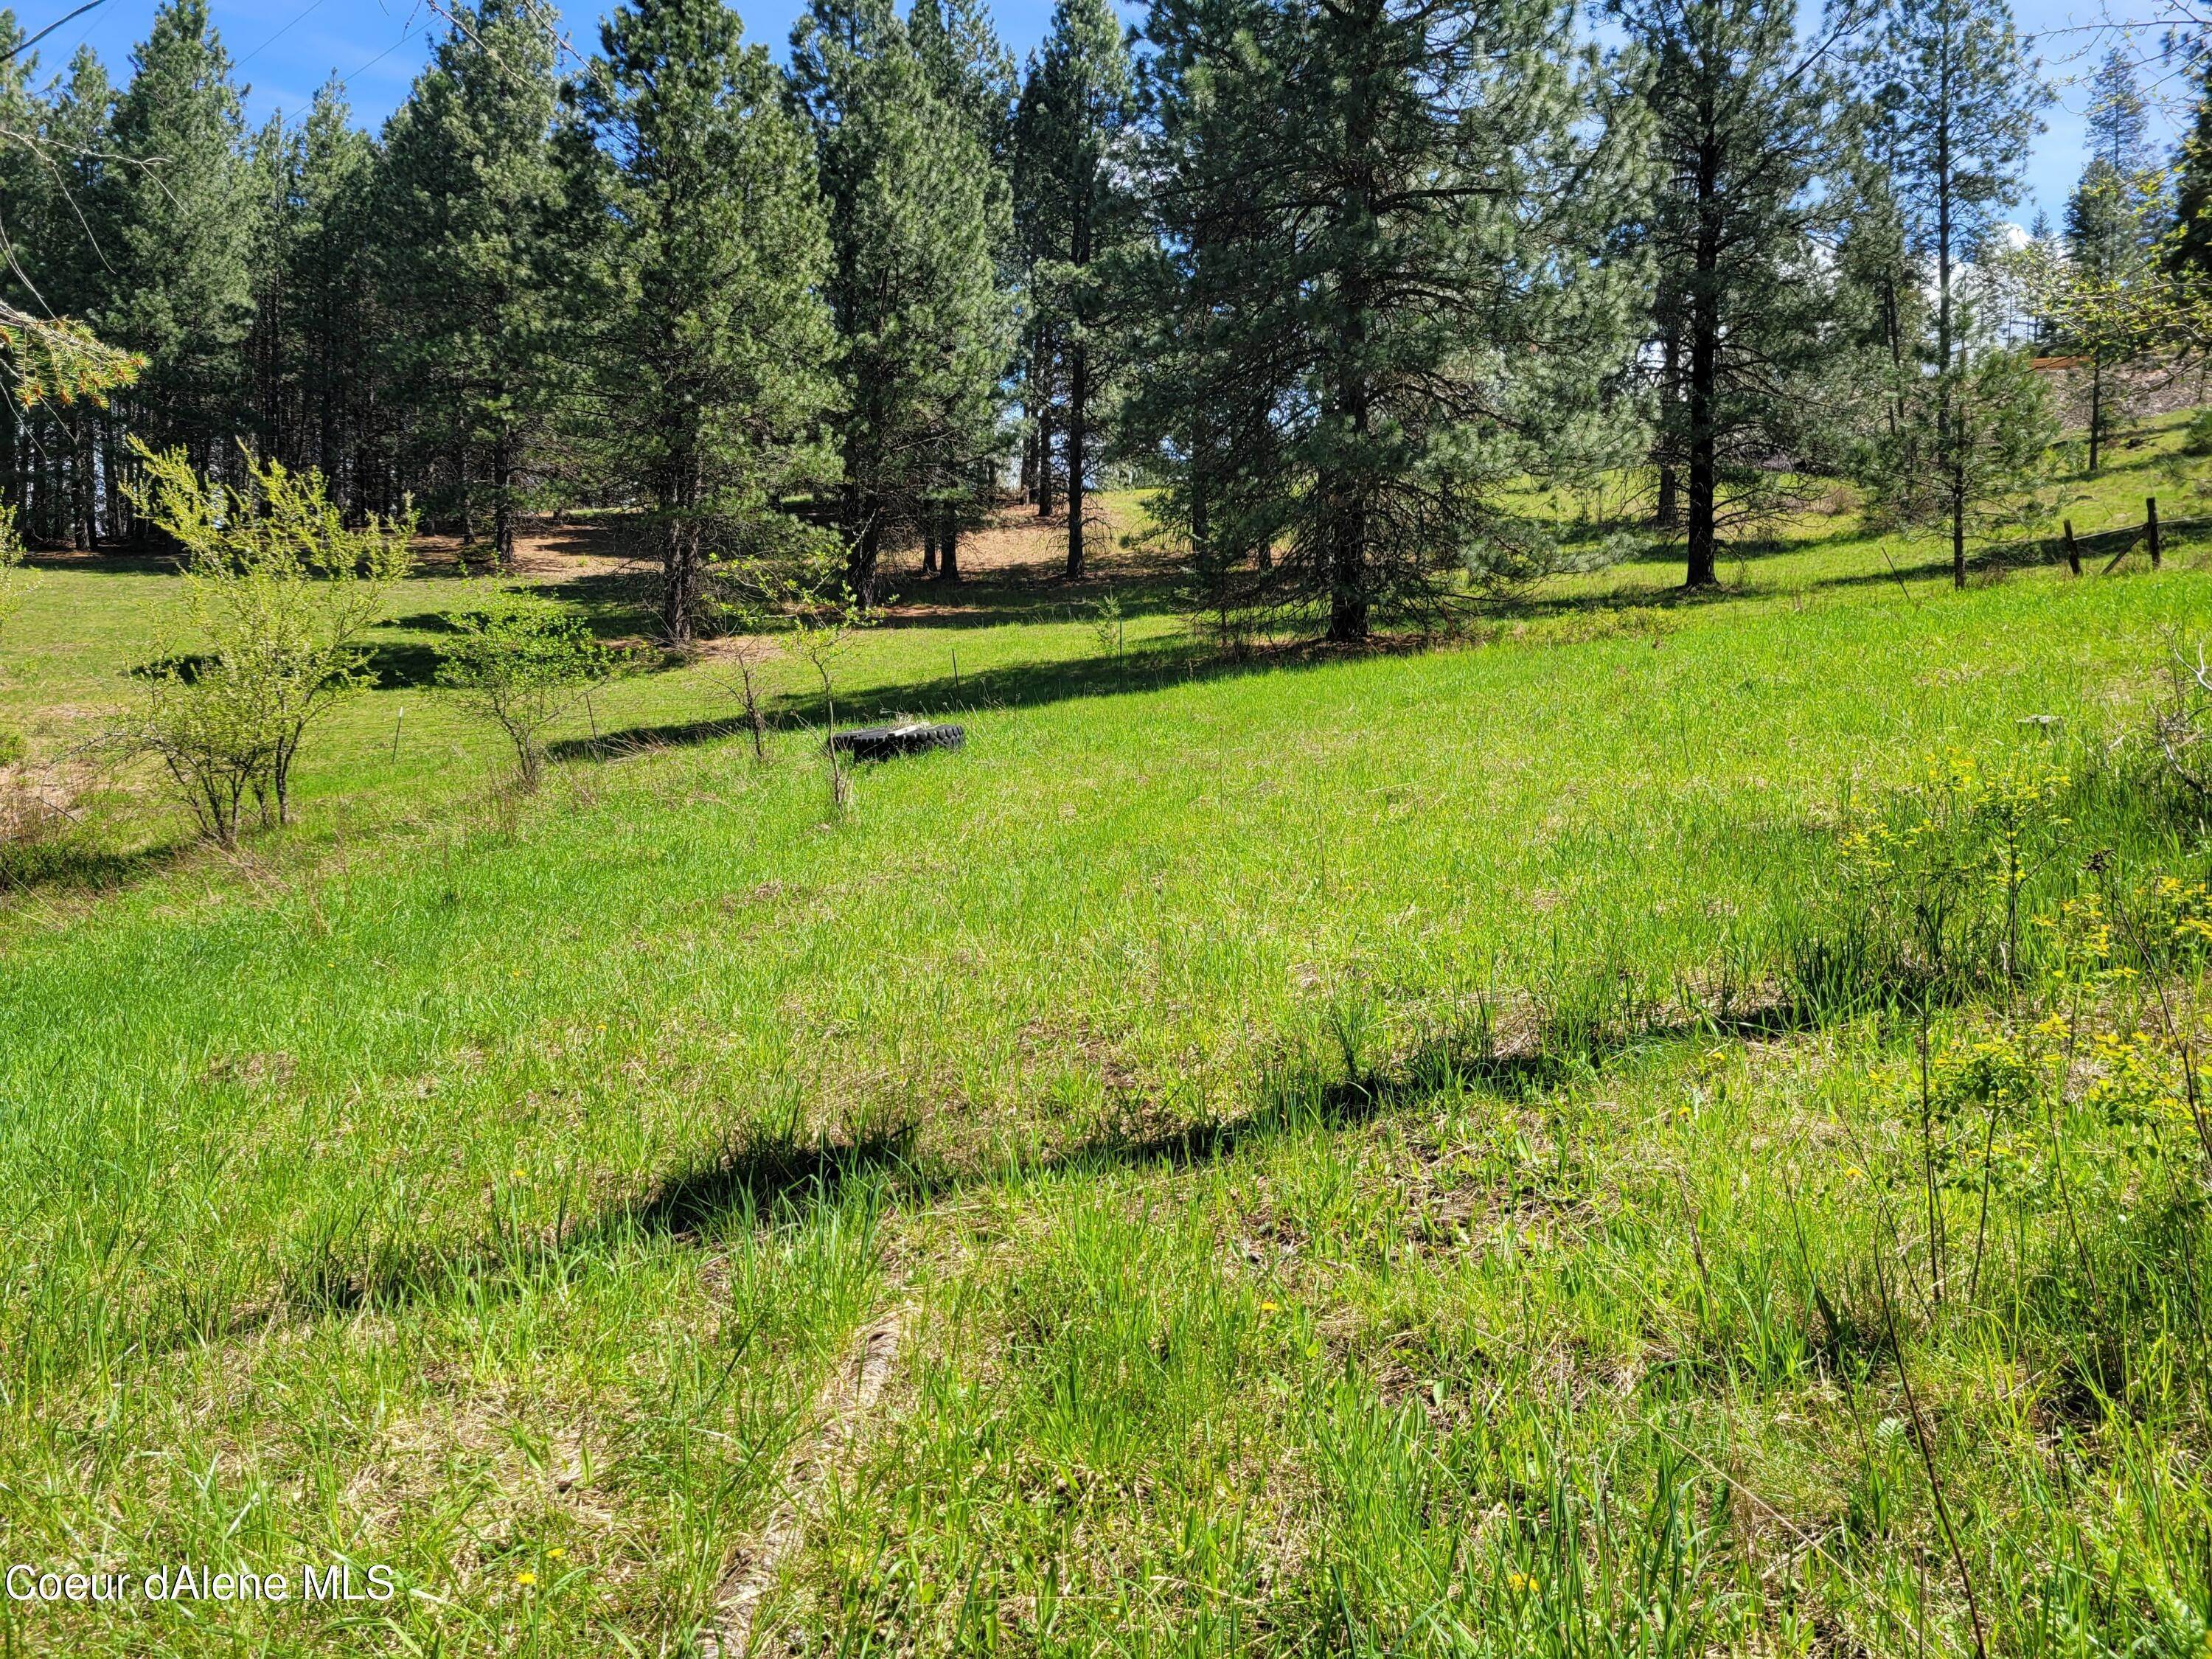 14. Land for Sale at 24124 S HIGHWAY 3 Cataldo, Idaho 83810 United States